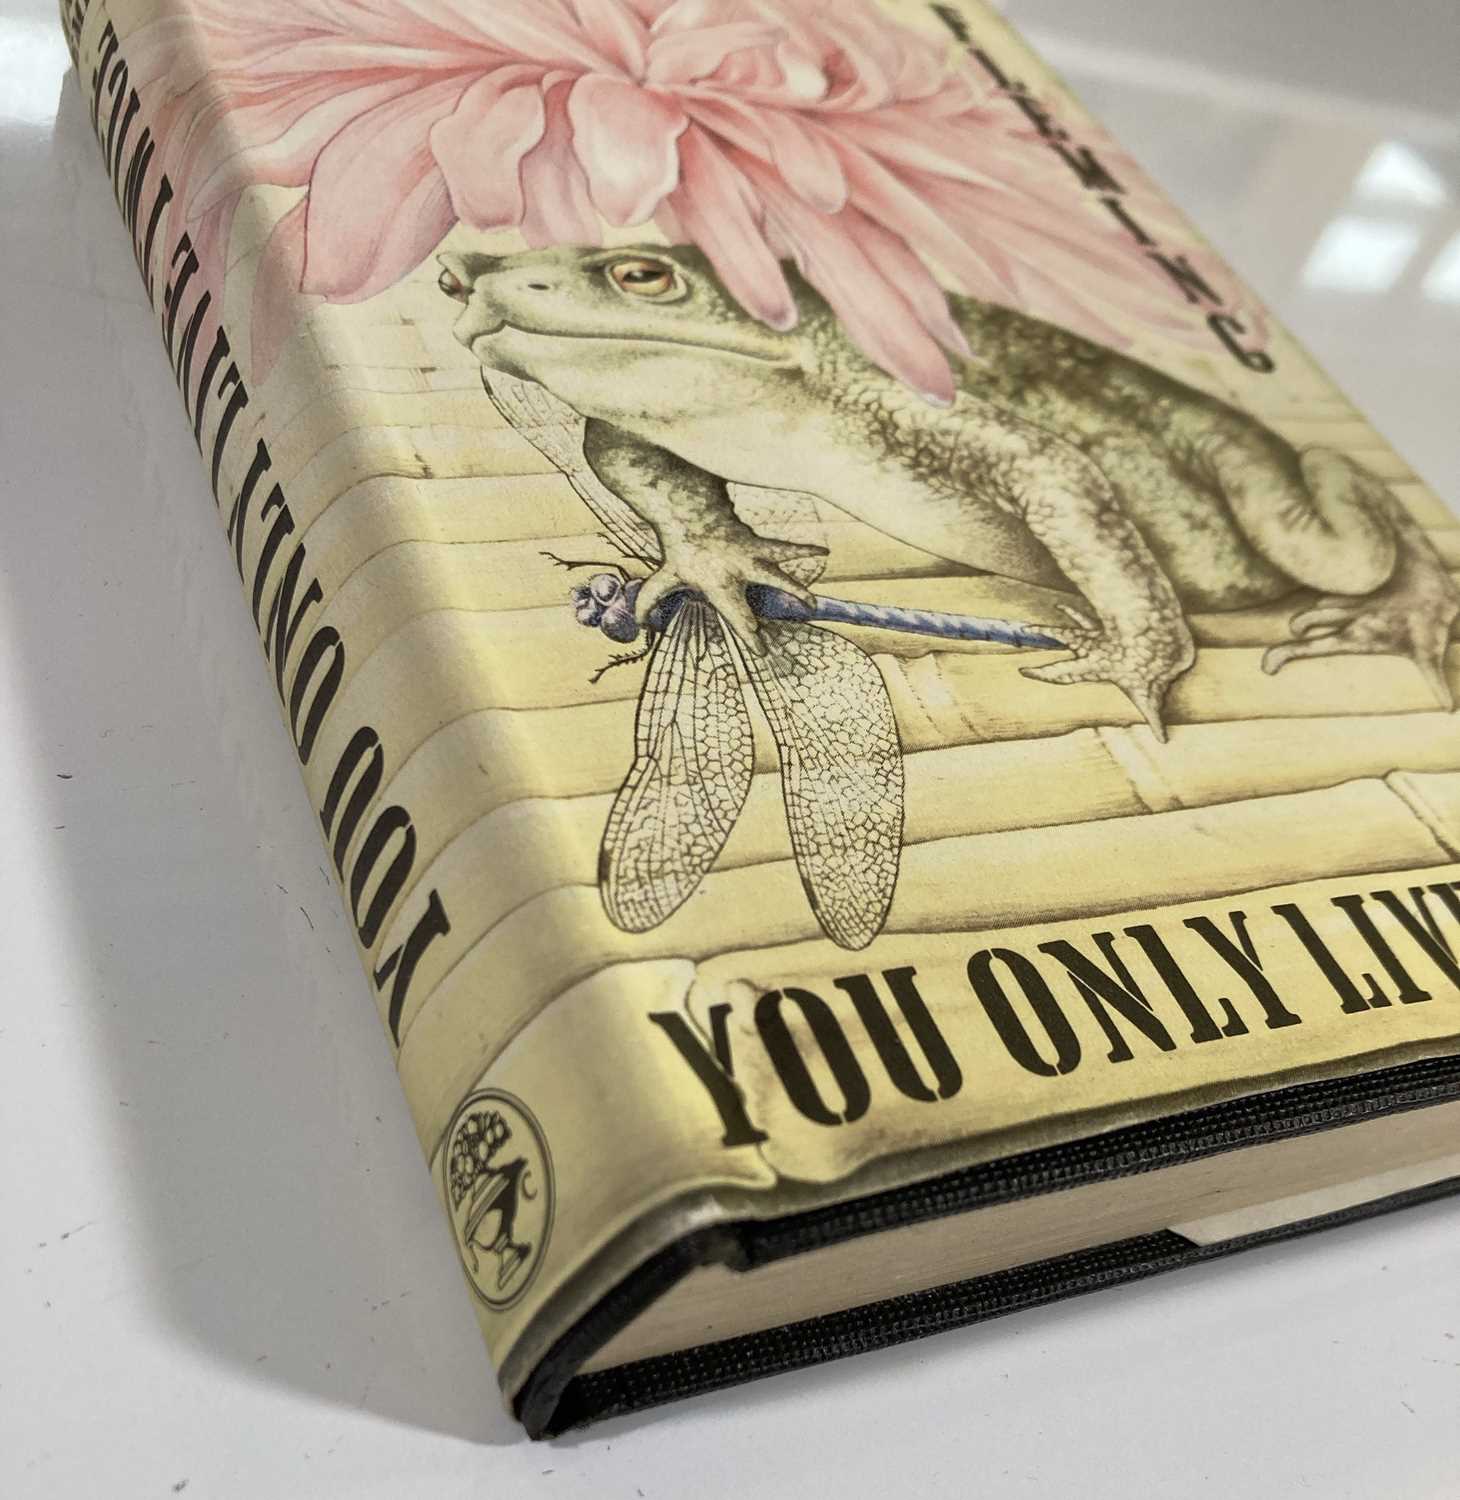 JAMES BOND - YOU ONLY LIVE TWICE FIRST EDITION. - Image 4 of 10